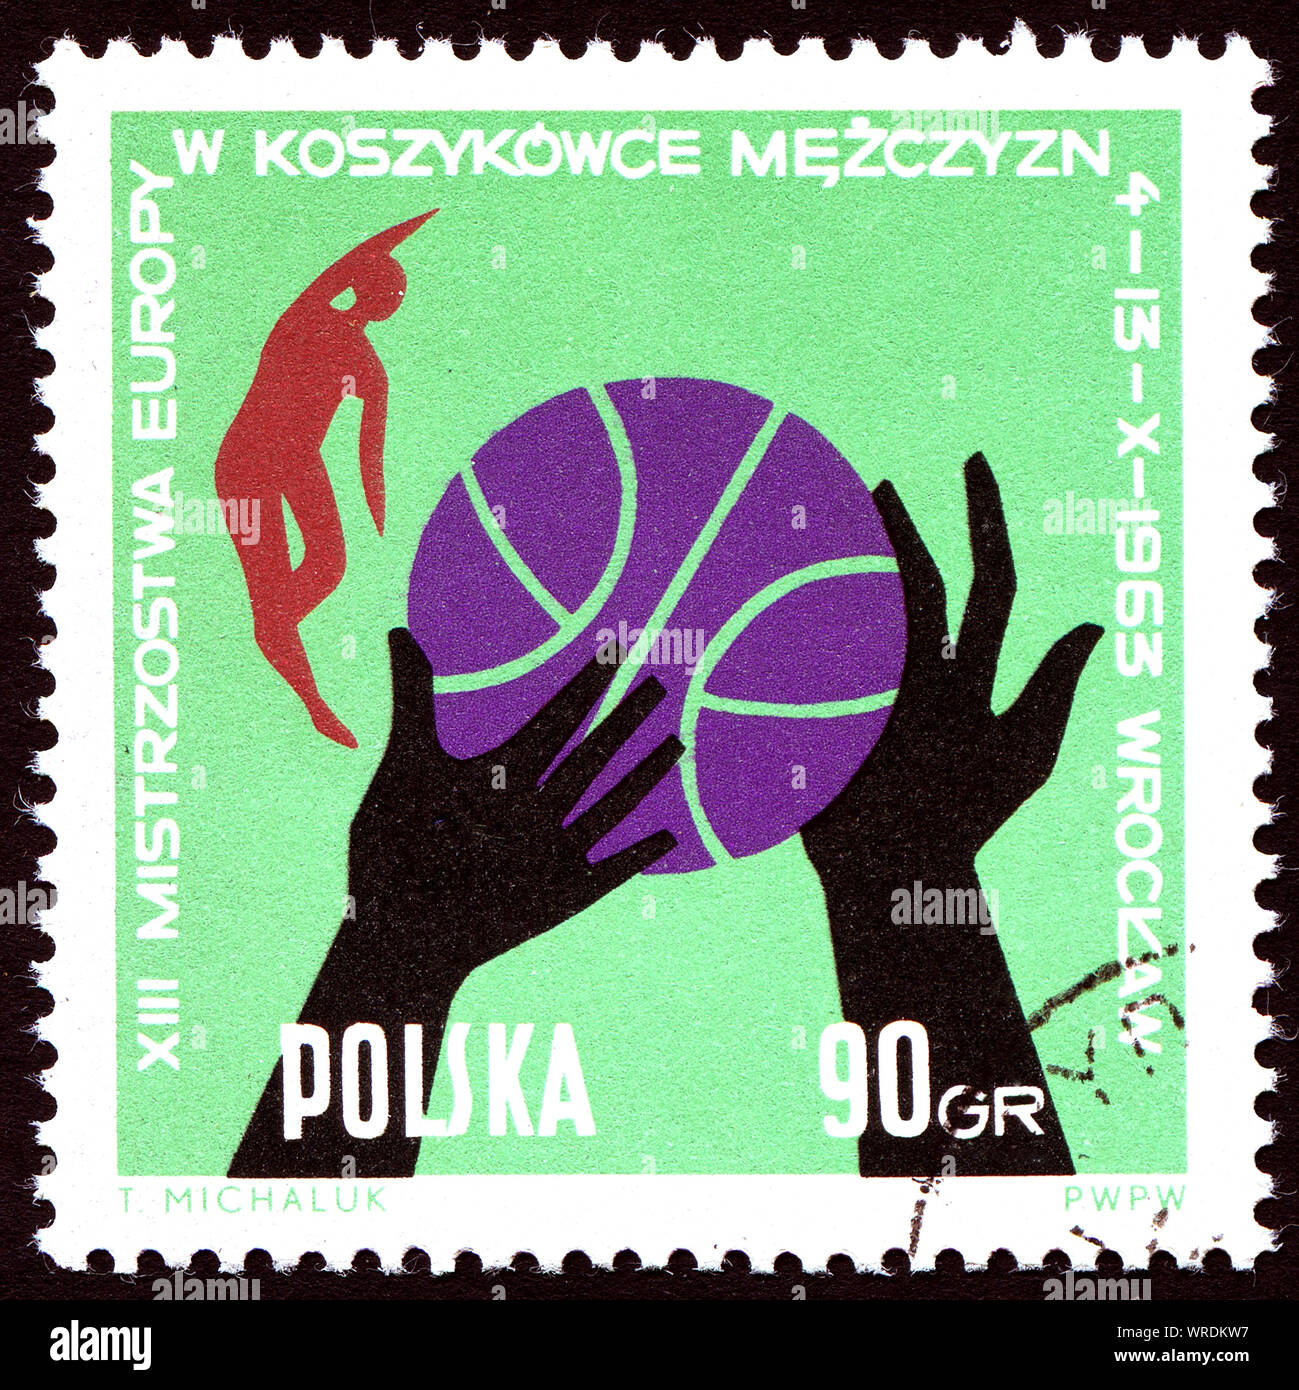 Post stamp printed in Poland showing  ball, hands and players, 13th European men basketball championship Wroclaw, circa 1963 Stock Photo